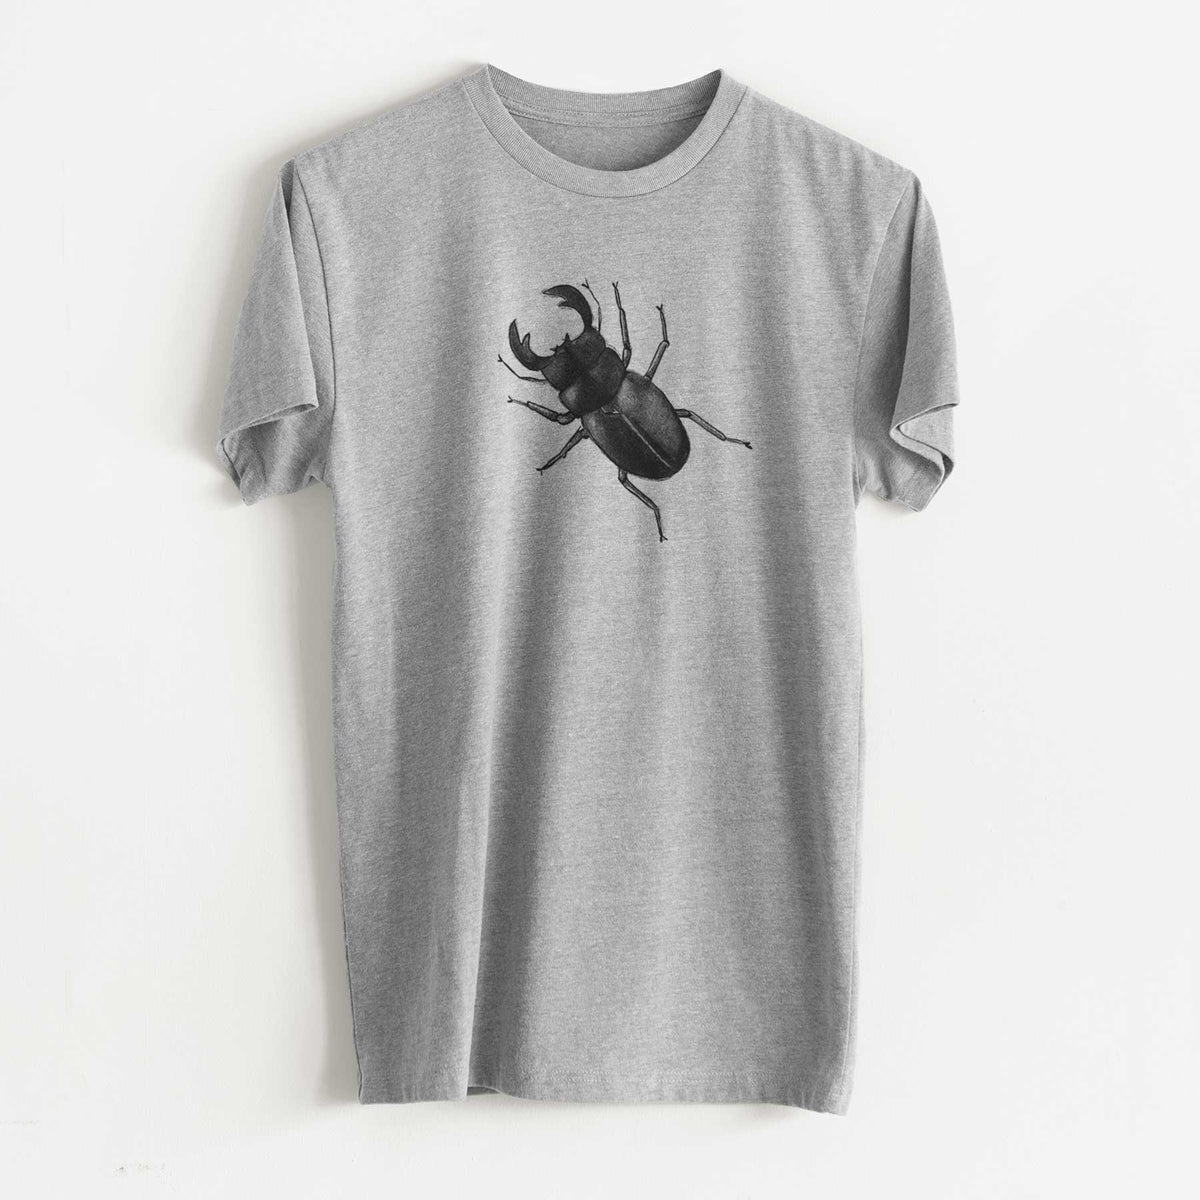 Dorcus titanus - Giant Stag Beetle - Unisex Recycled Eco Tee  - CLOSEOUT - FINAL SALE